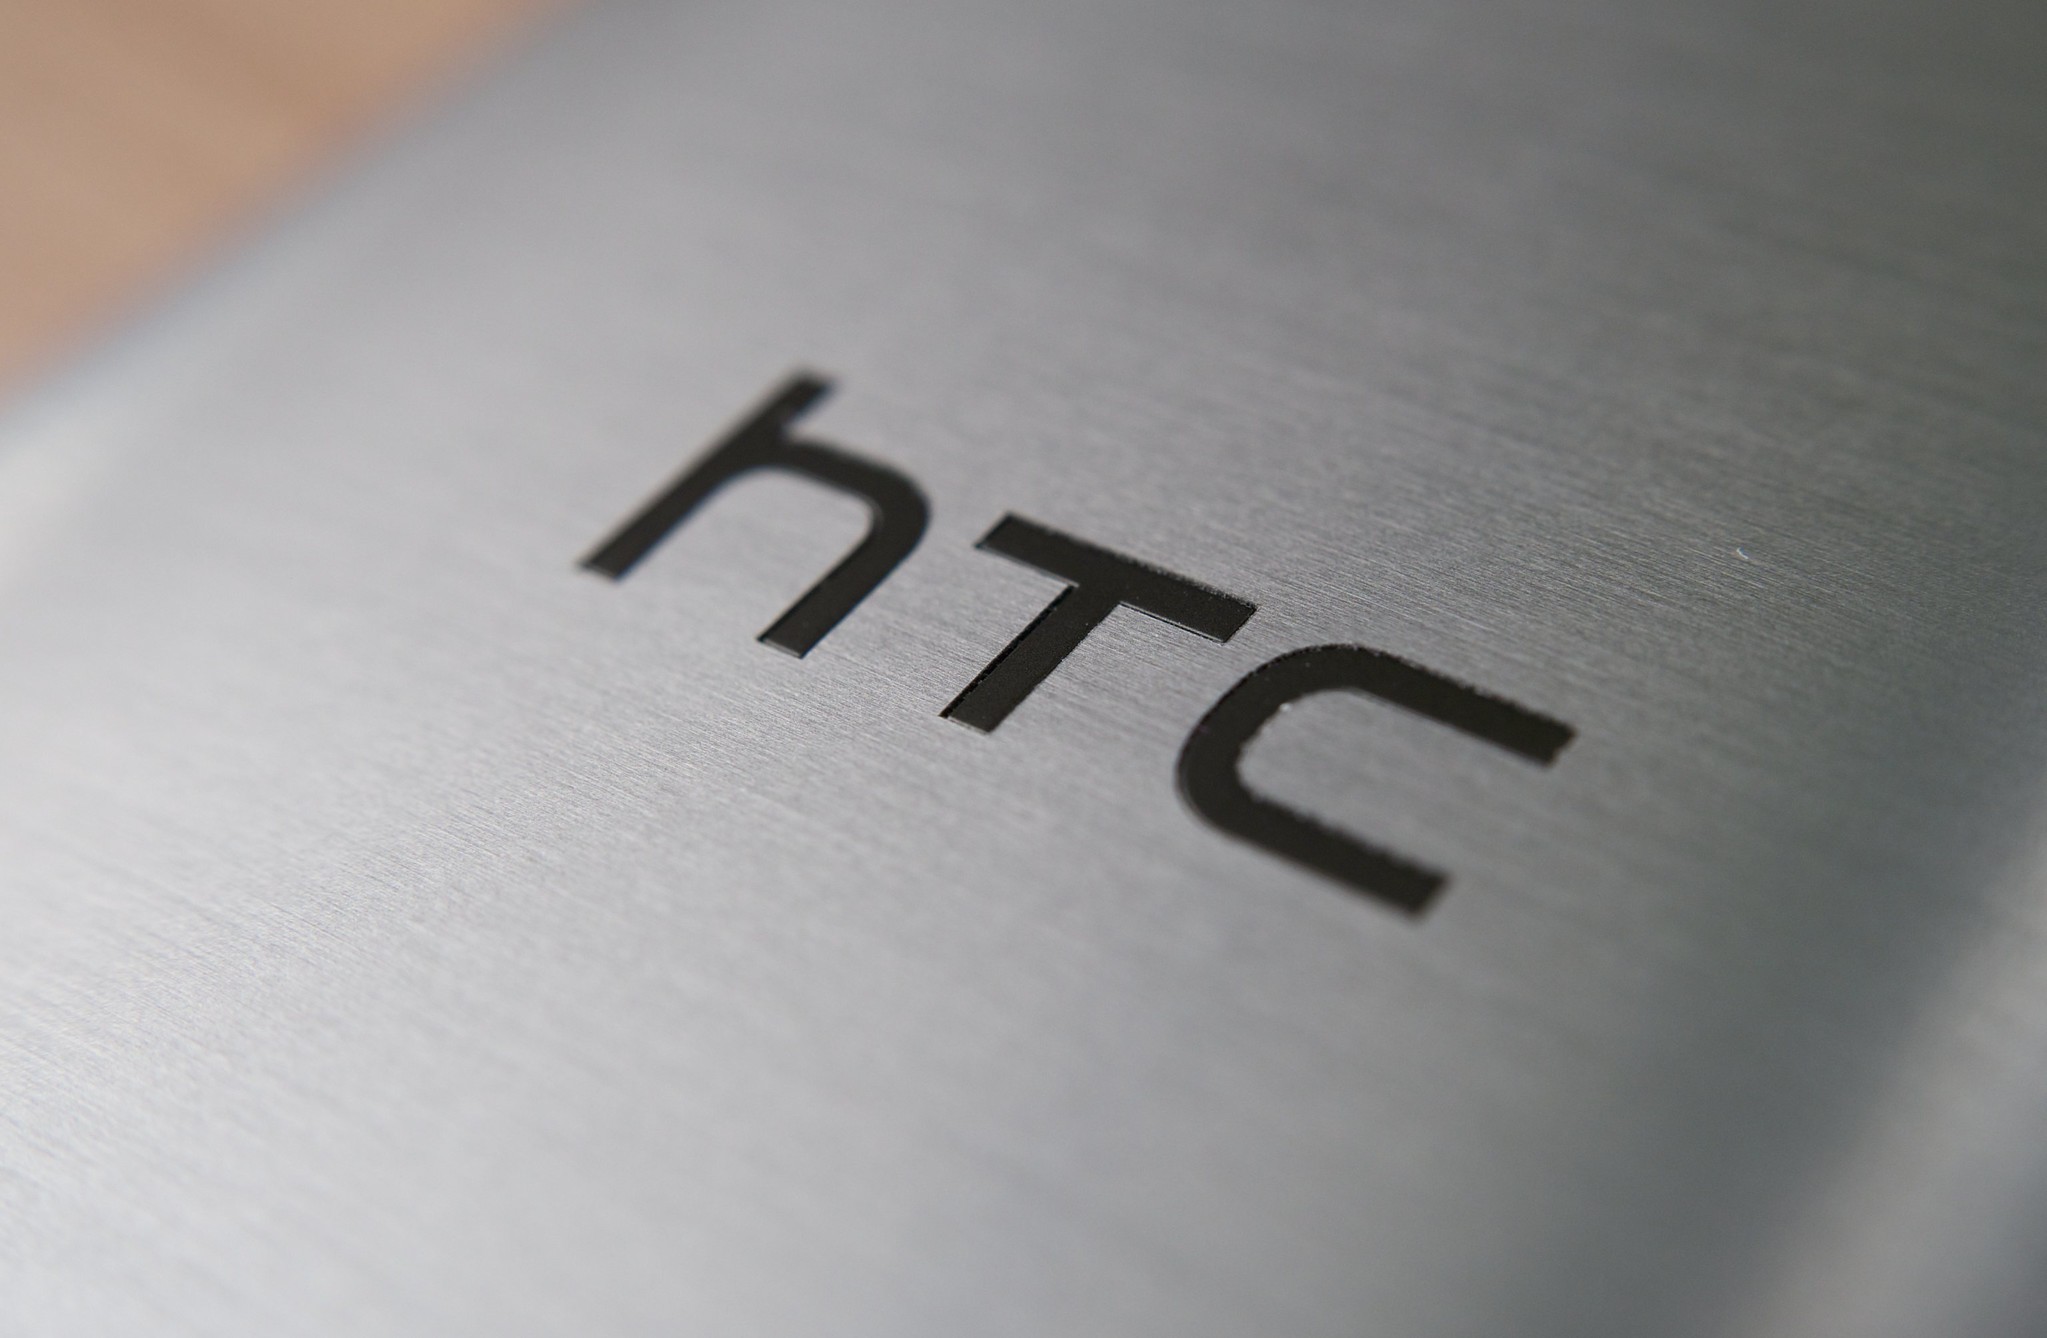 Review of HTC Wildfire R70 smartphone with main characteristics